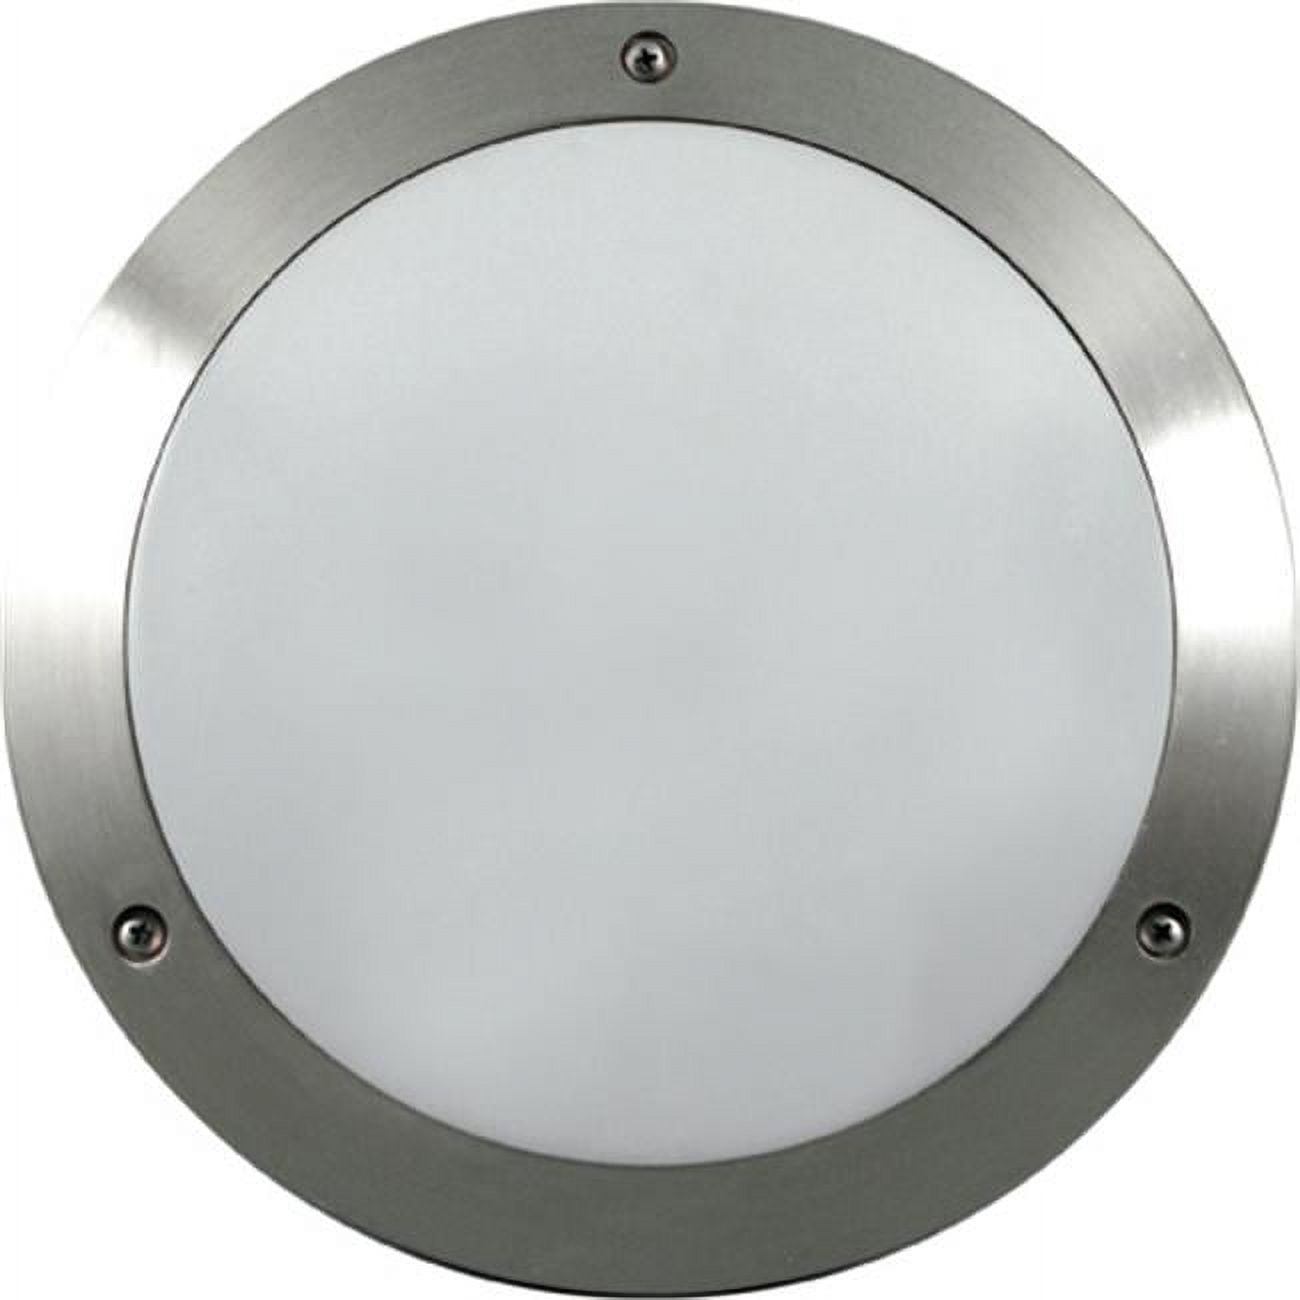 Picture of Dabmar Lighting W3900-SS 10.50 x 10.50 x 2.75 in. 120 V 60 watts Incandenscent Type Powder Coated Cast Aluminum Surface Mounted Wall Fixture Light, Stainless Steel